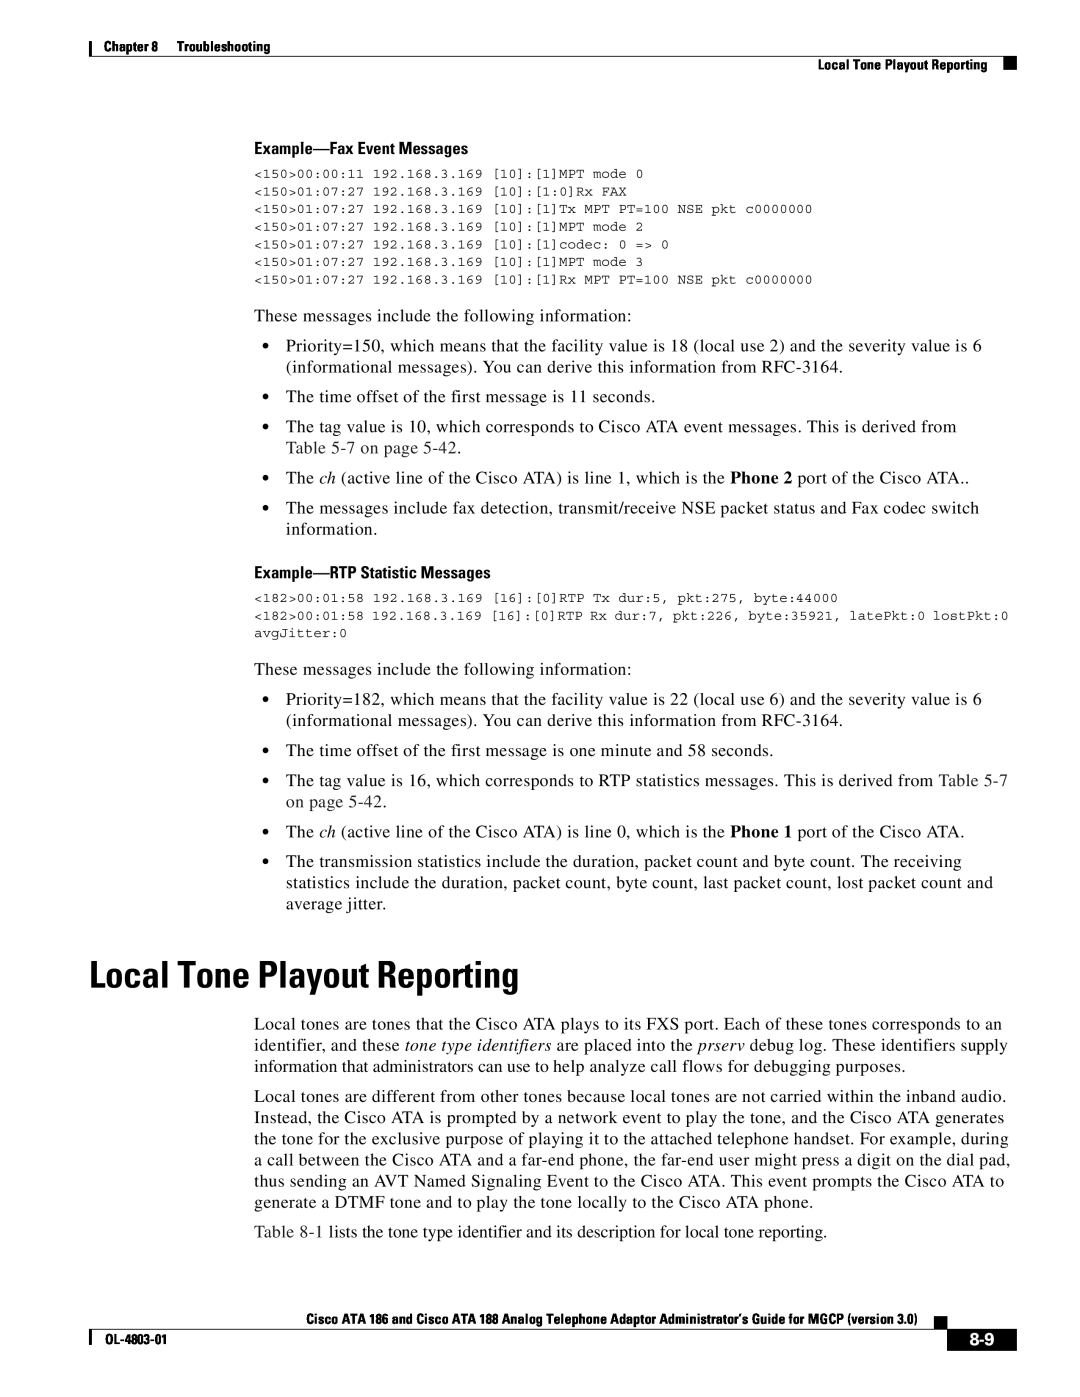 Cisco Systems ATA 186 manual Local Tone Playout Reporting, Example-Fax Event Messages, Example-RTP Statistic Messages 